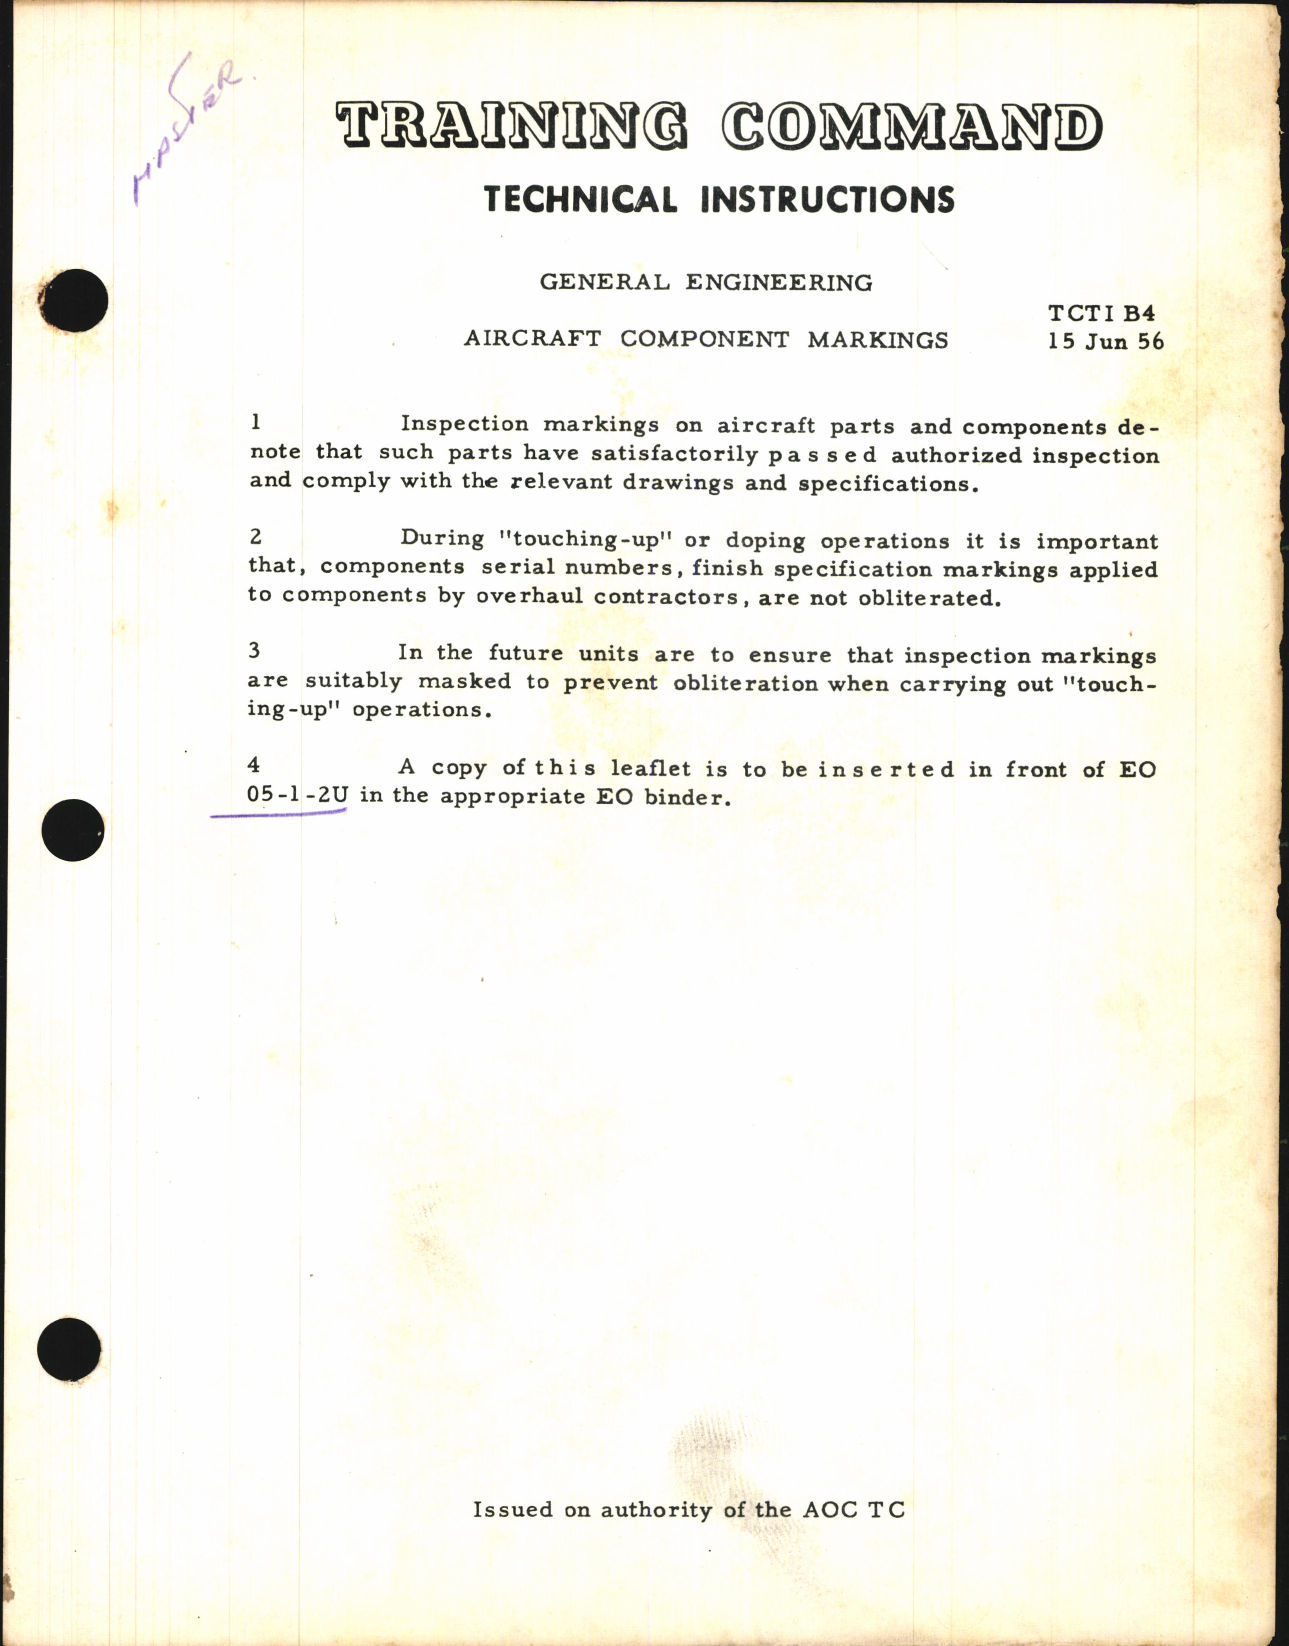 Sample page 1 from AirCorps Library document: Training Command Technical Instructions for Aircraft Component Markings